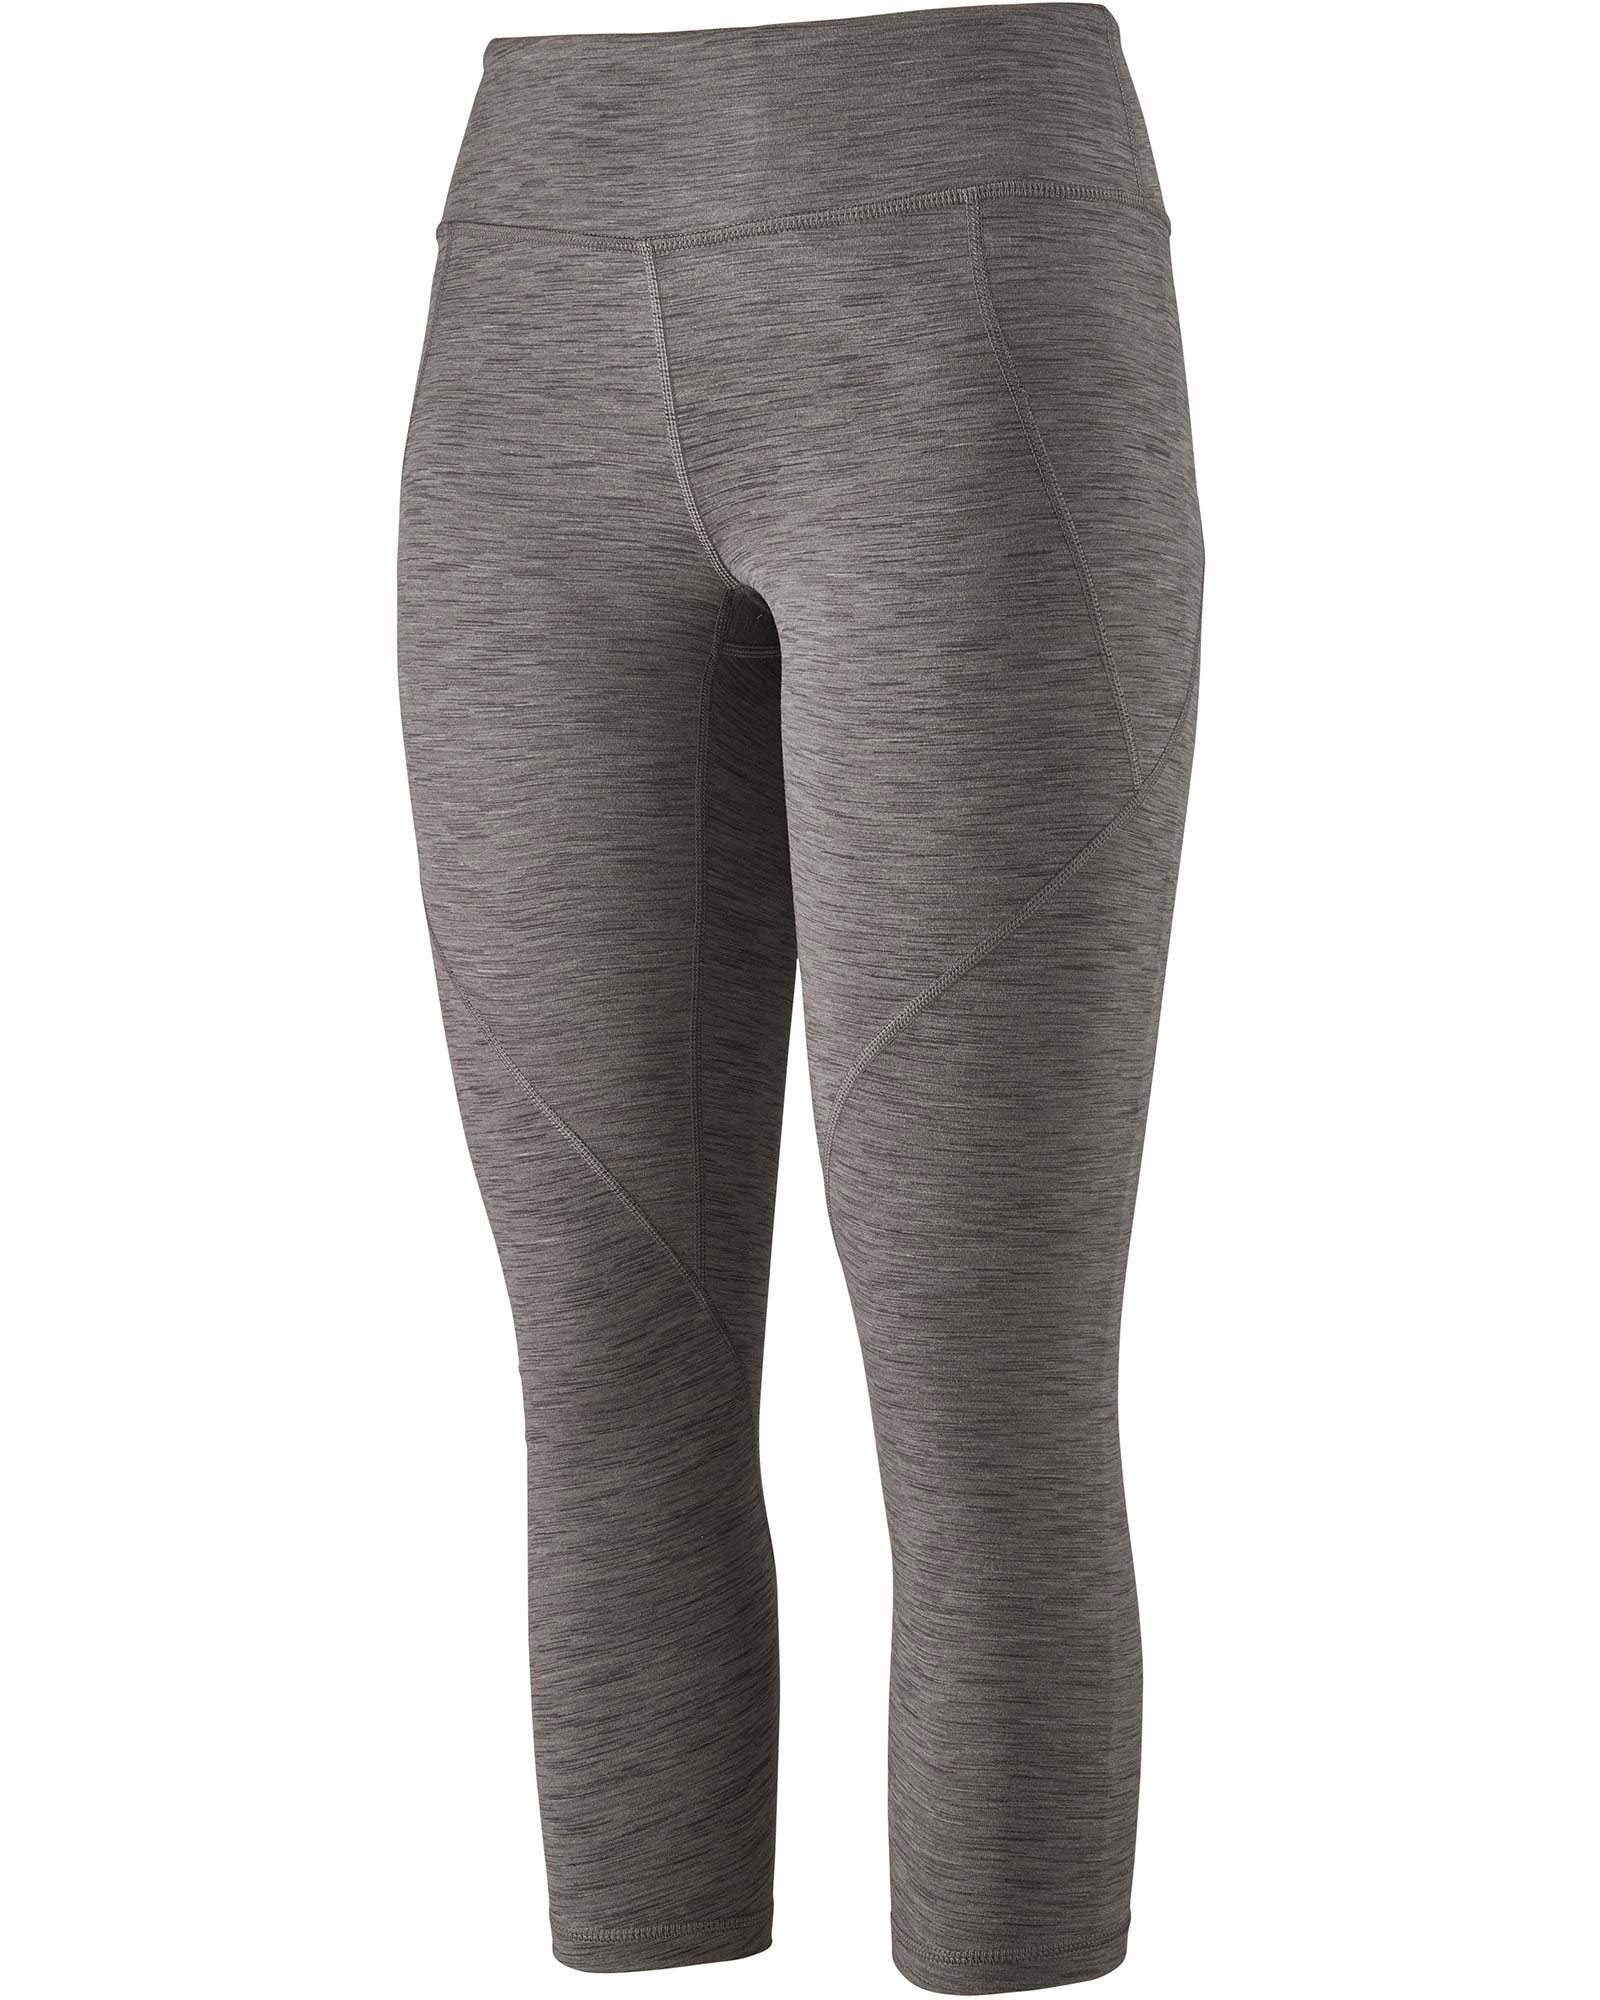 Patagonia Centered Crops Womens Tights